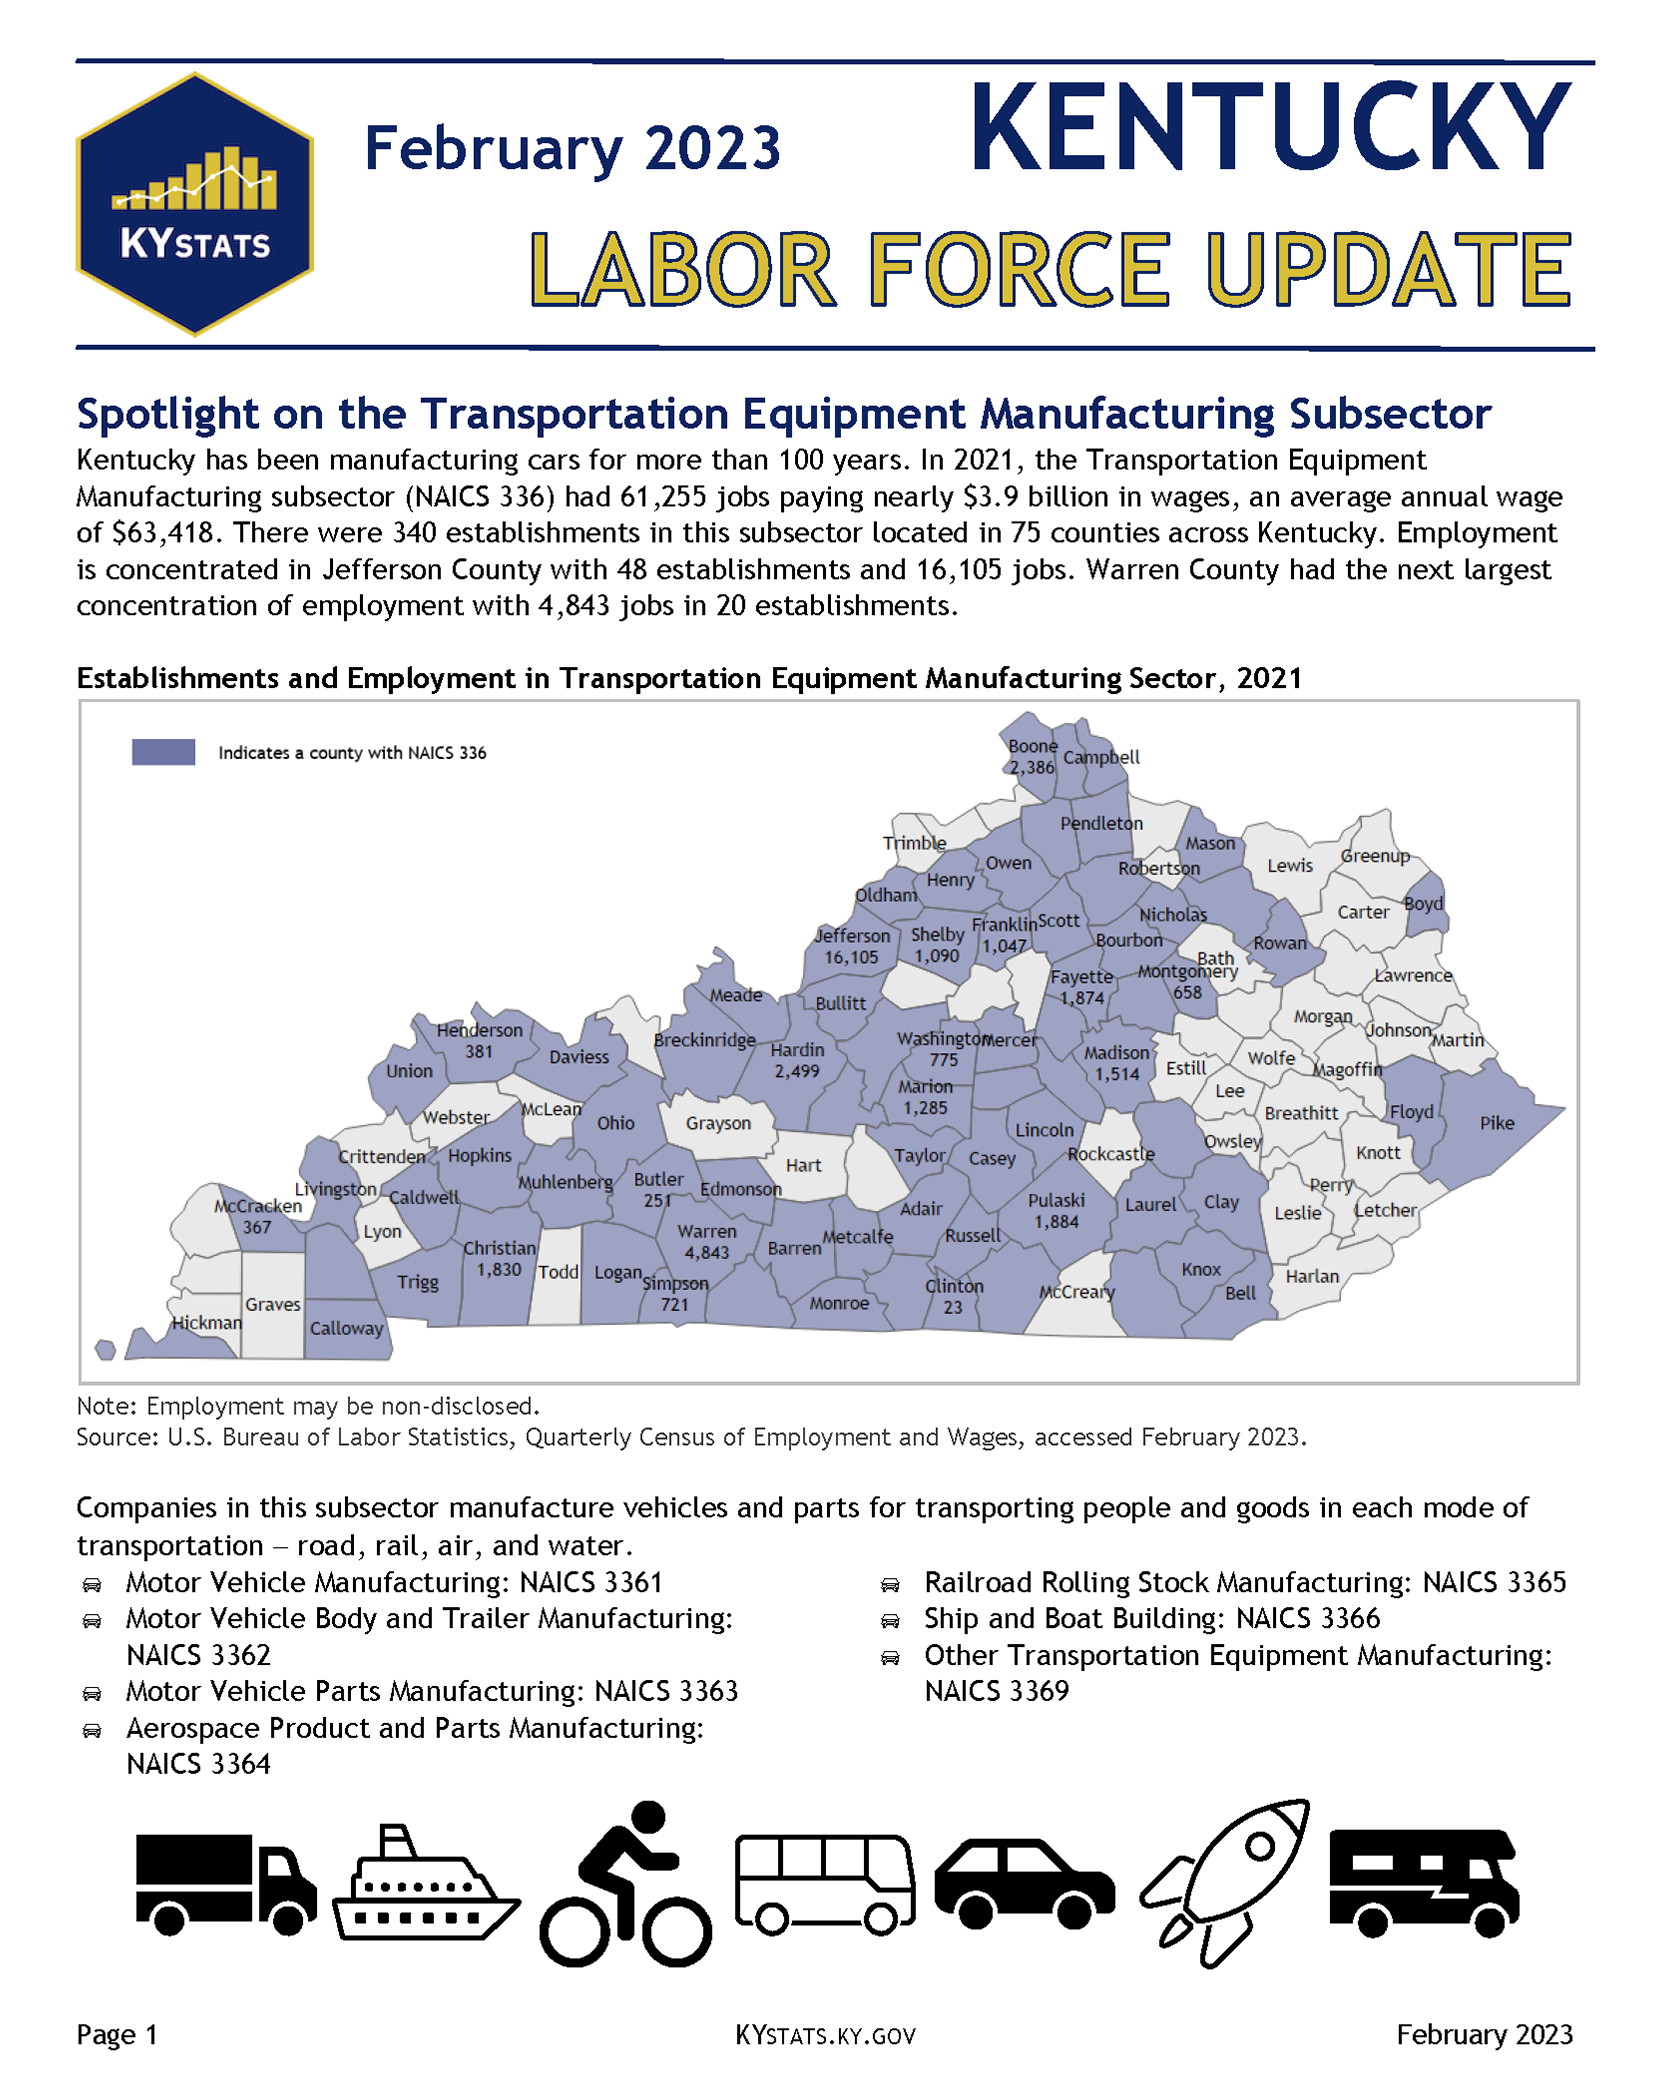 July 2022 Labor Force Update Image